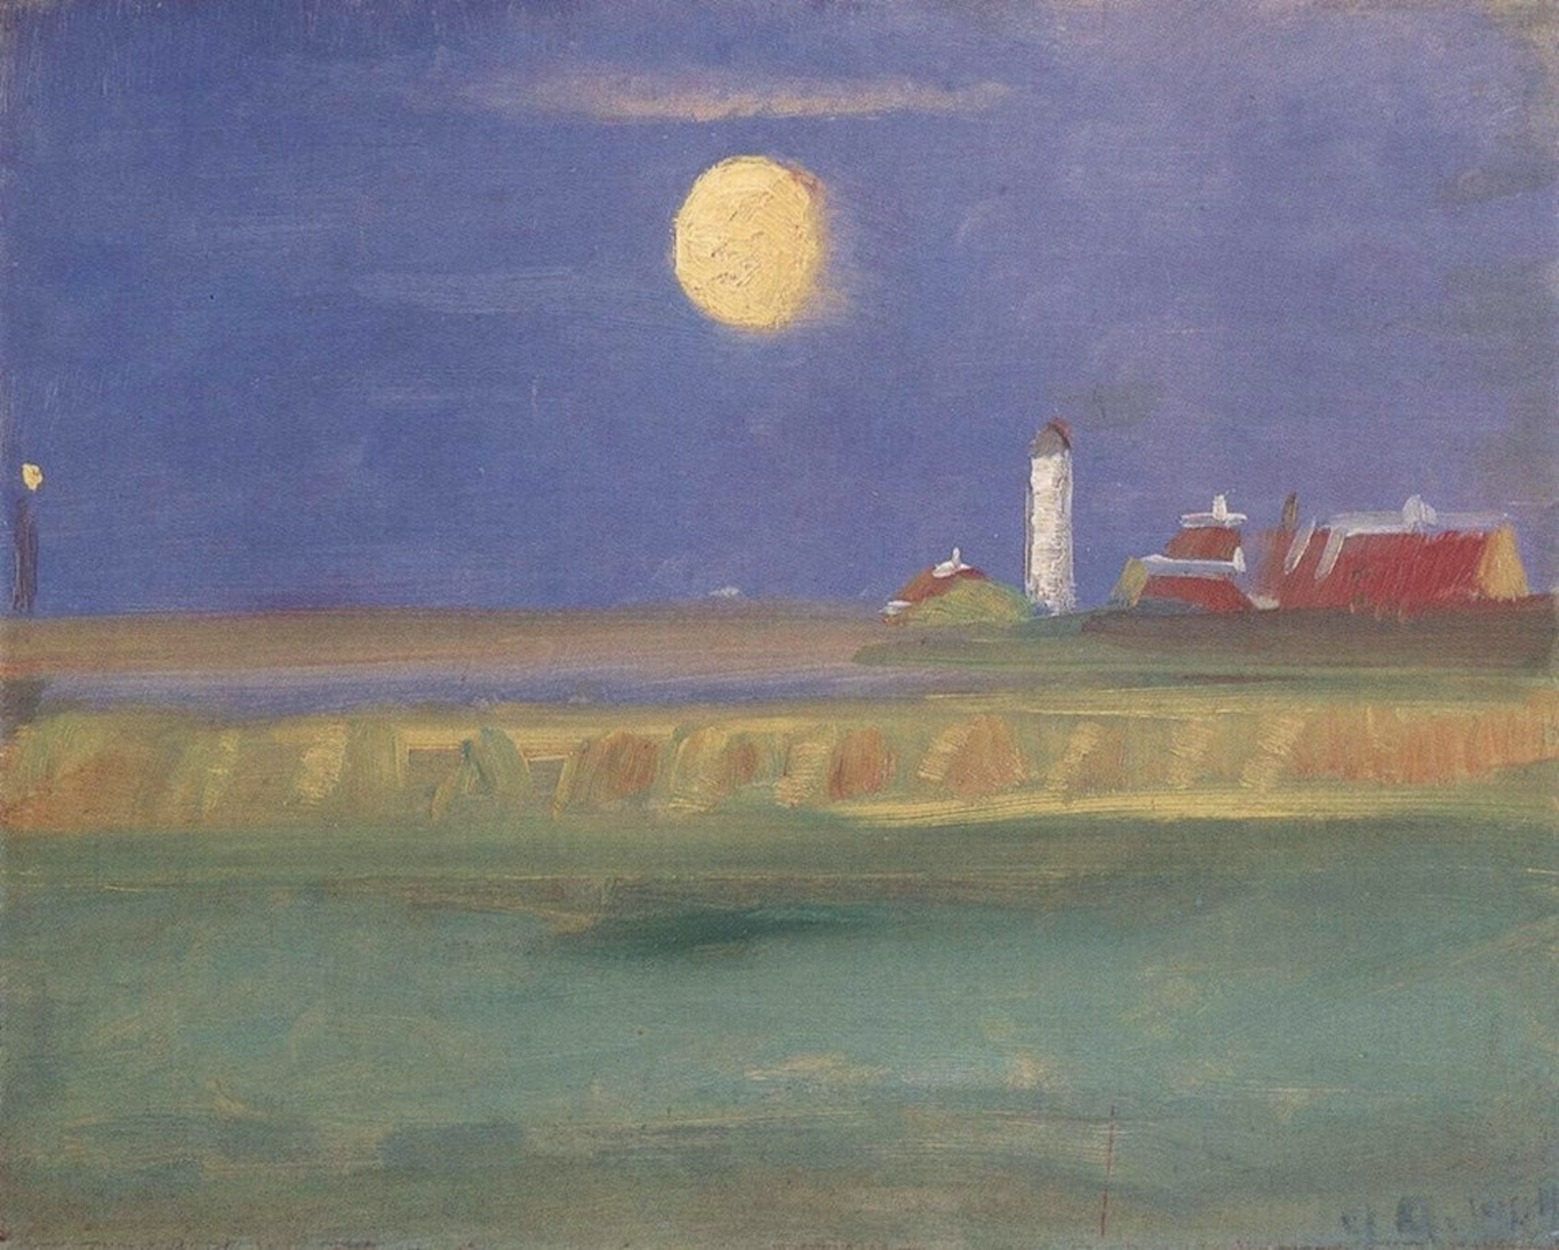 Moon Evening. Lighthouse by Anna Ancher - 1904 - 23 x 28 cm private collection